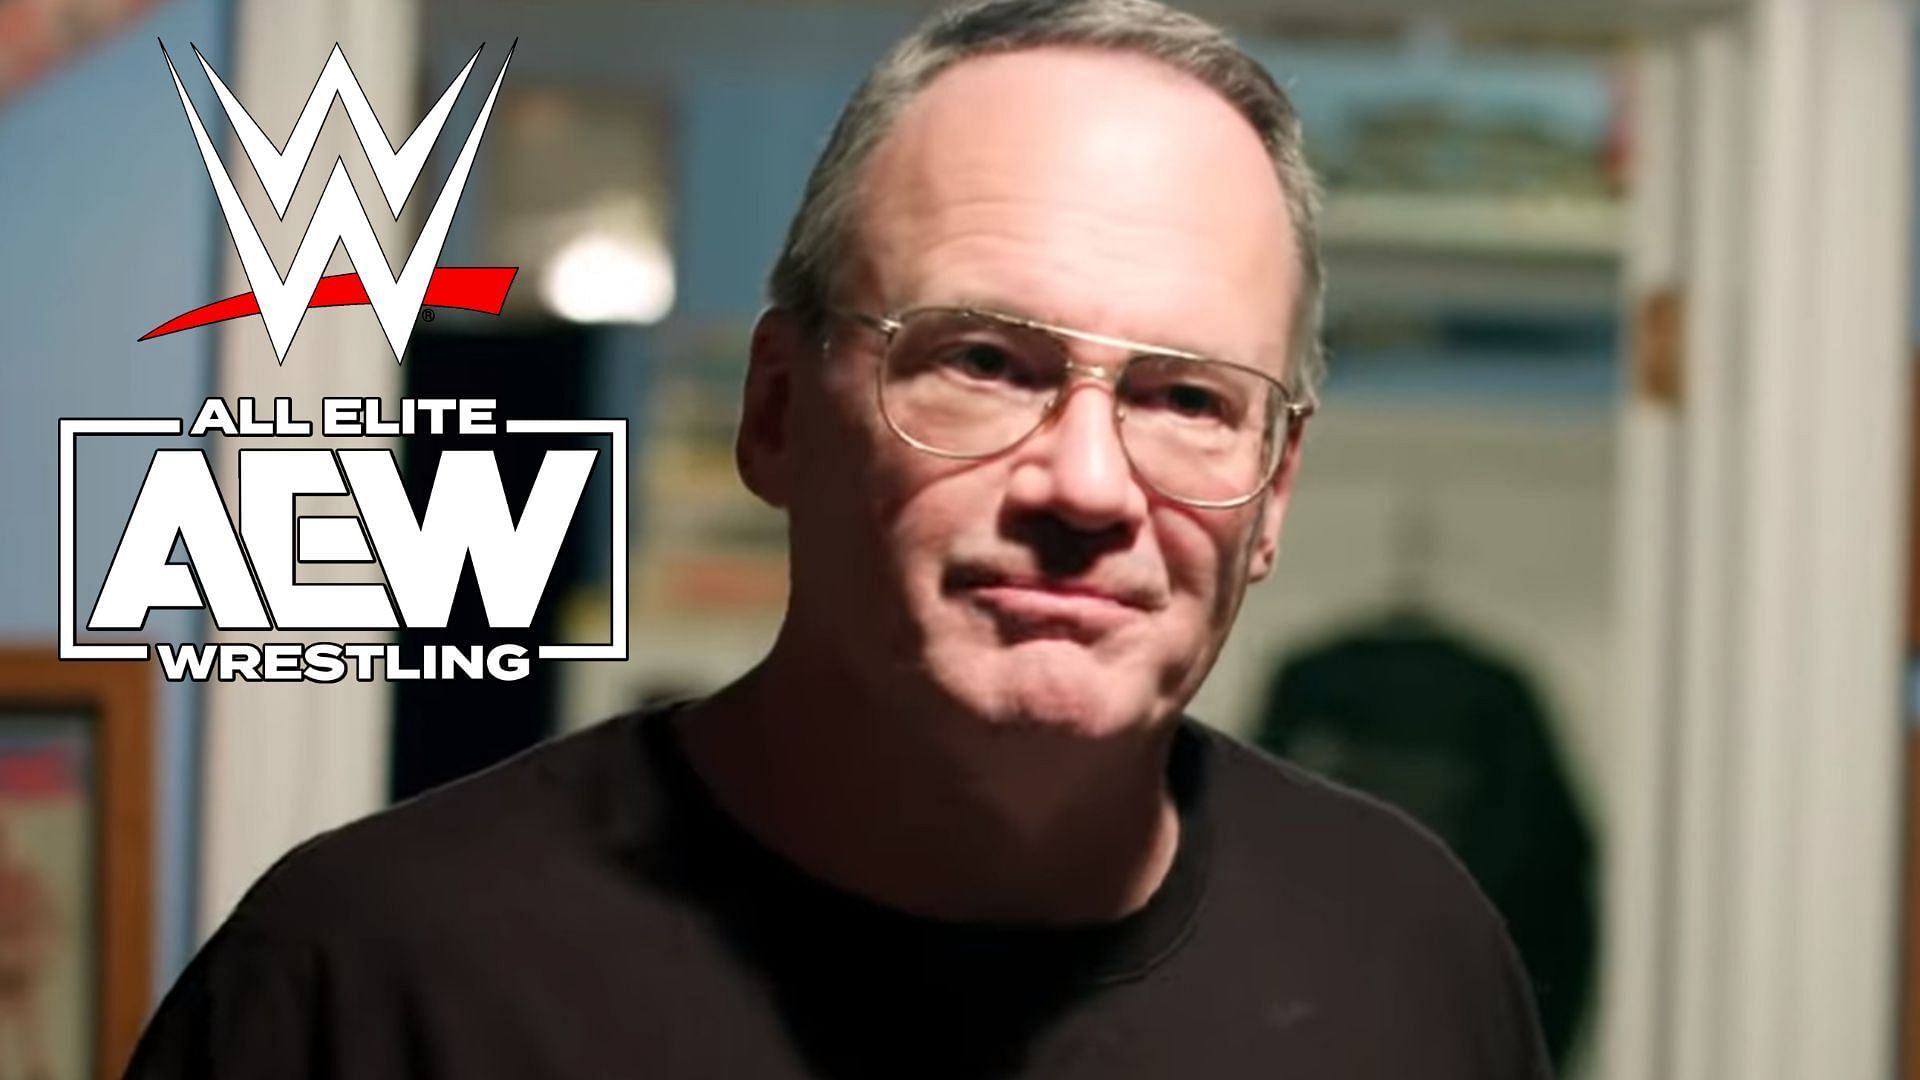 Does Jim Cornette have insight into this star that others don